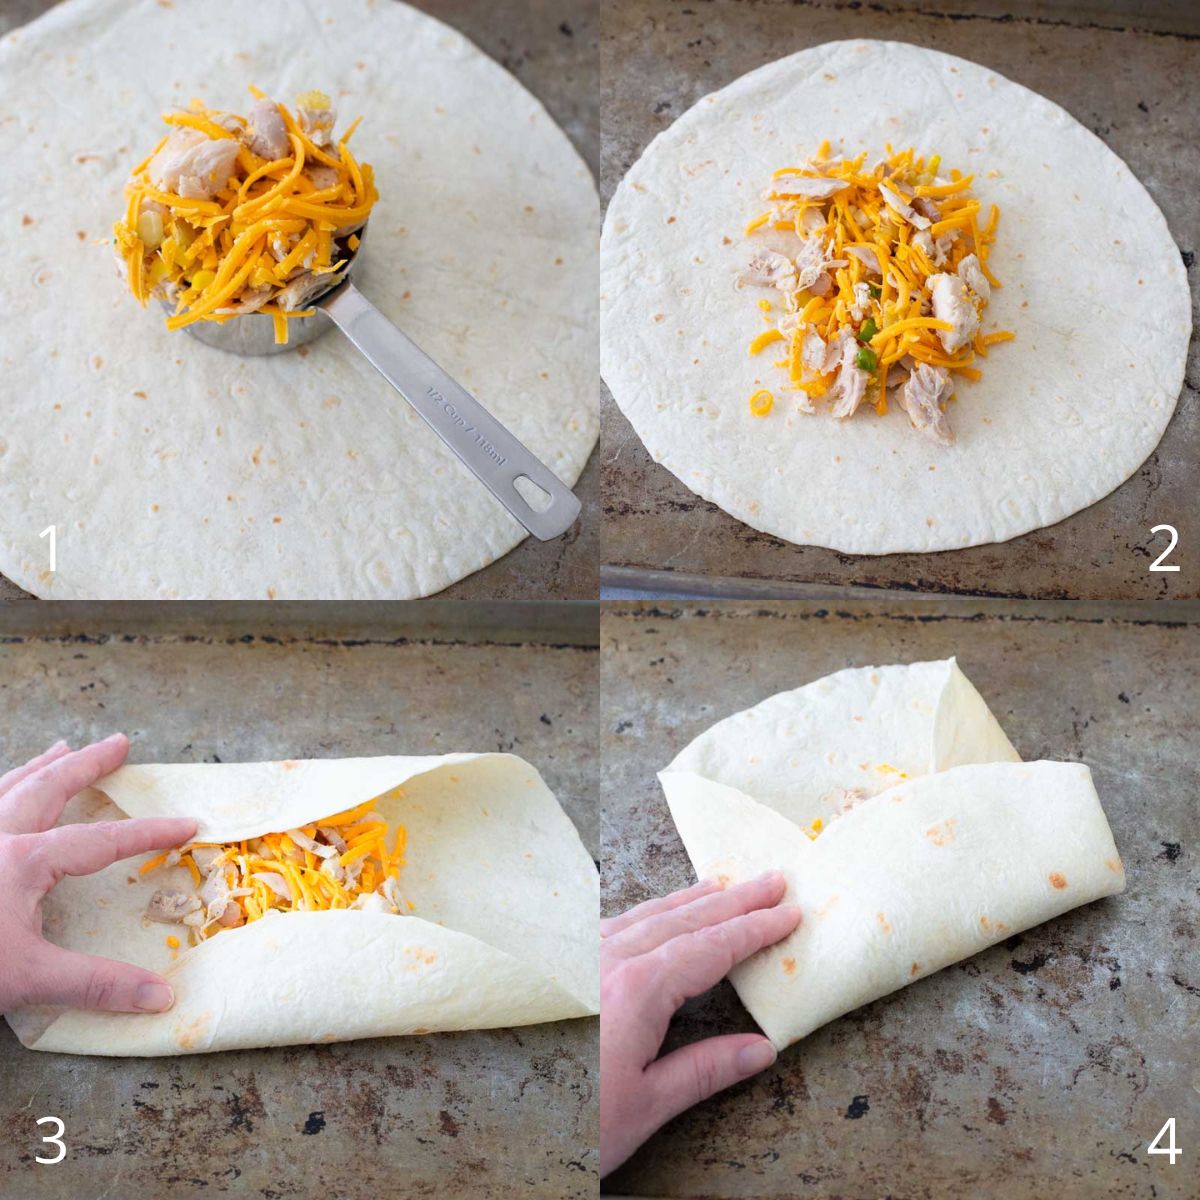 The step by step photos show how to roll a chimichanga or burrito. 